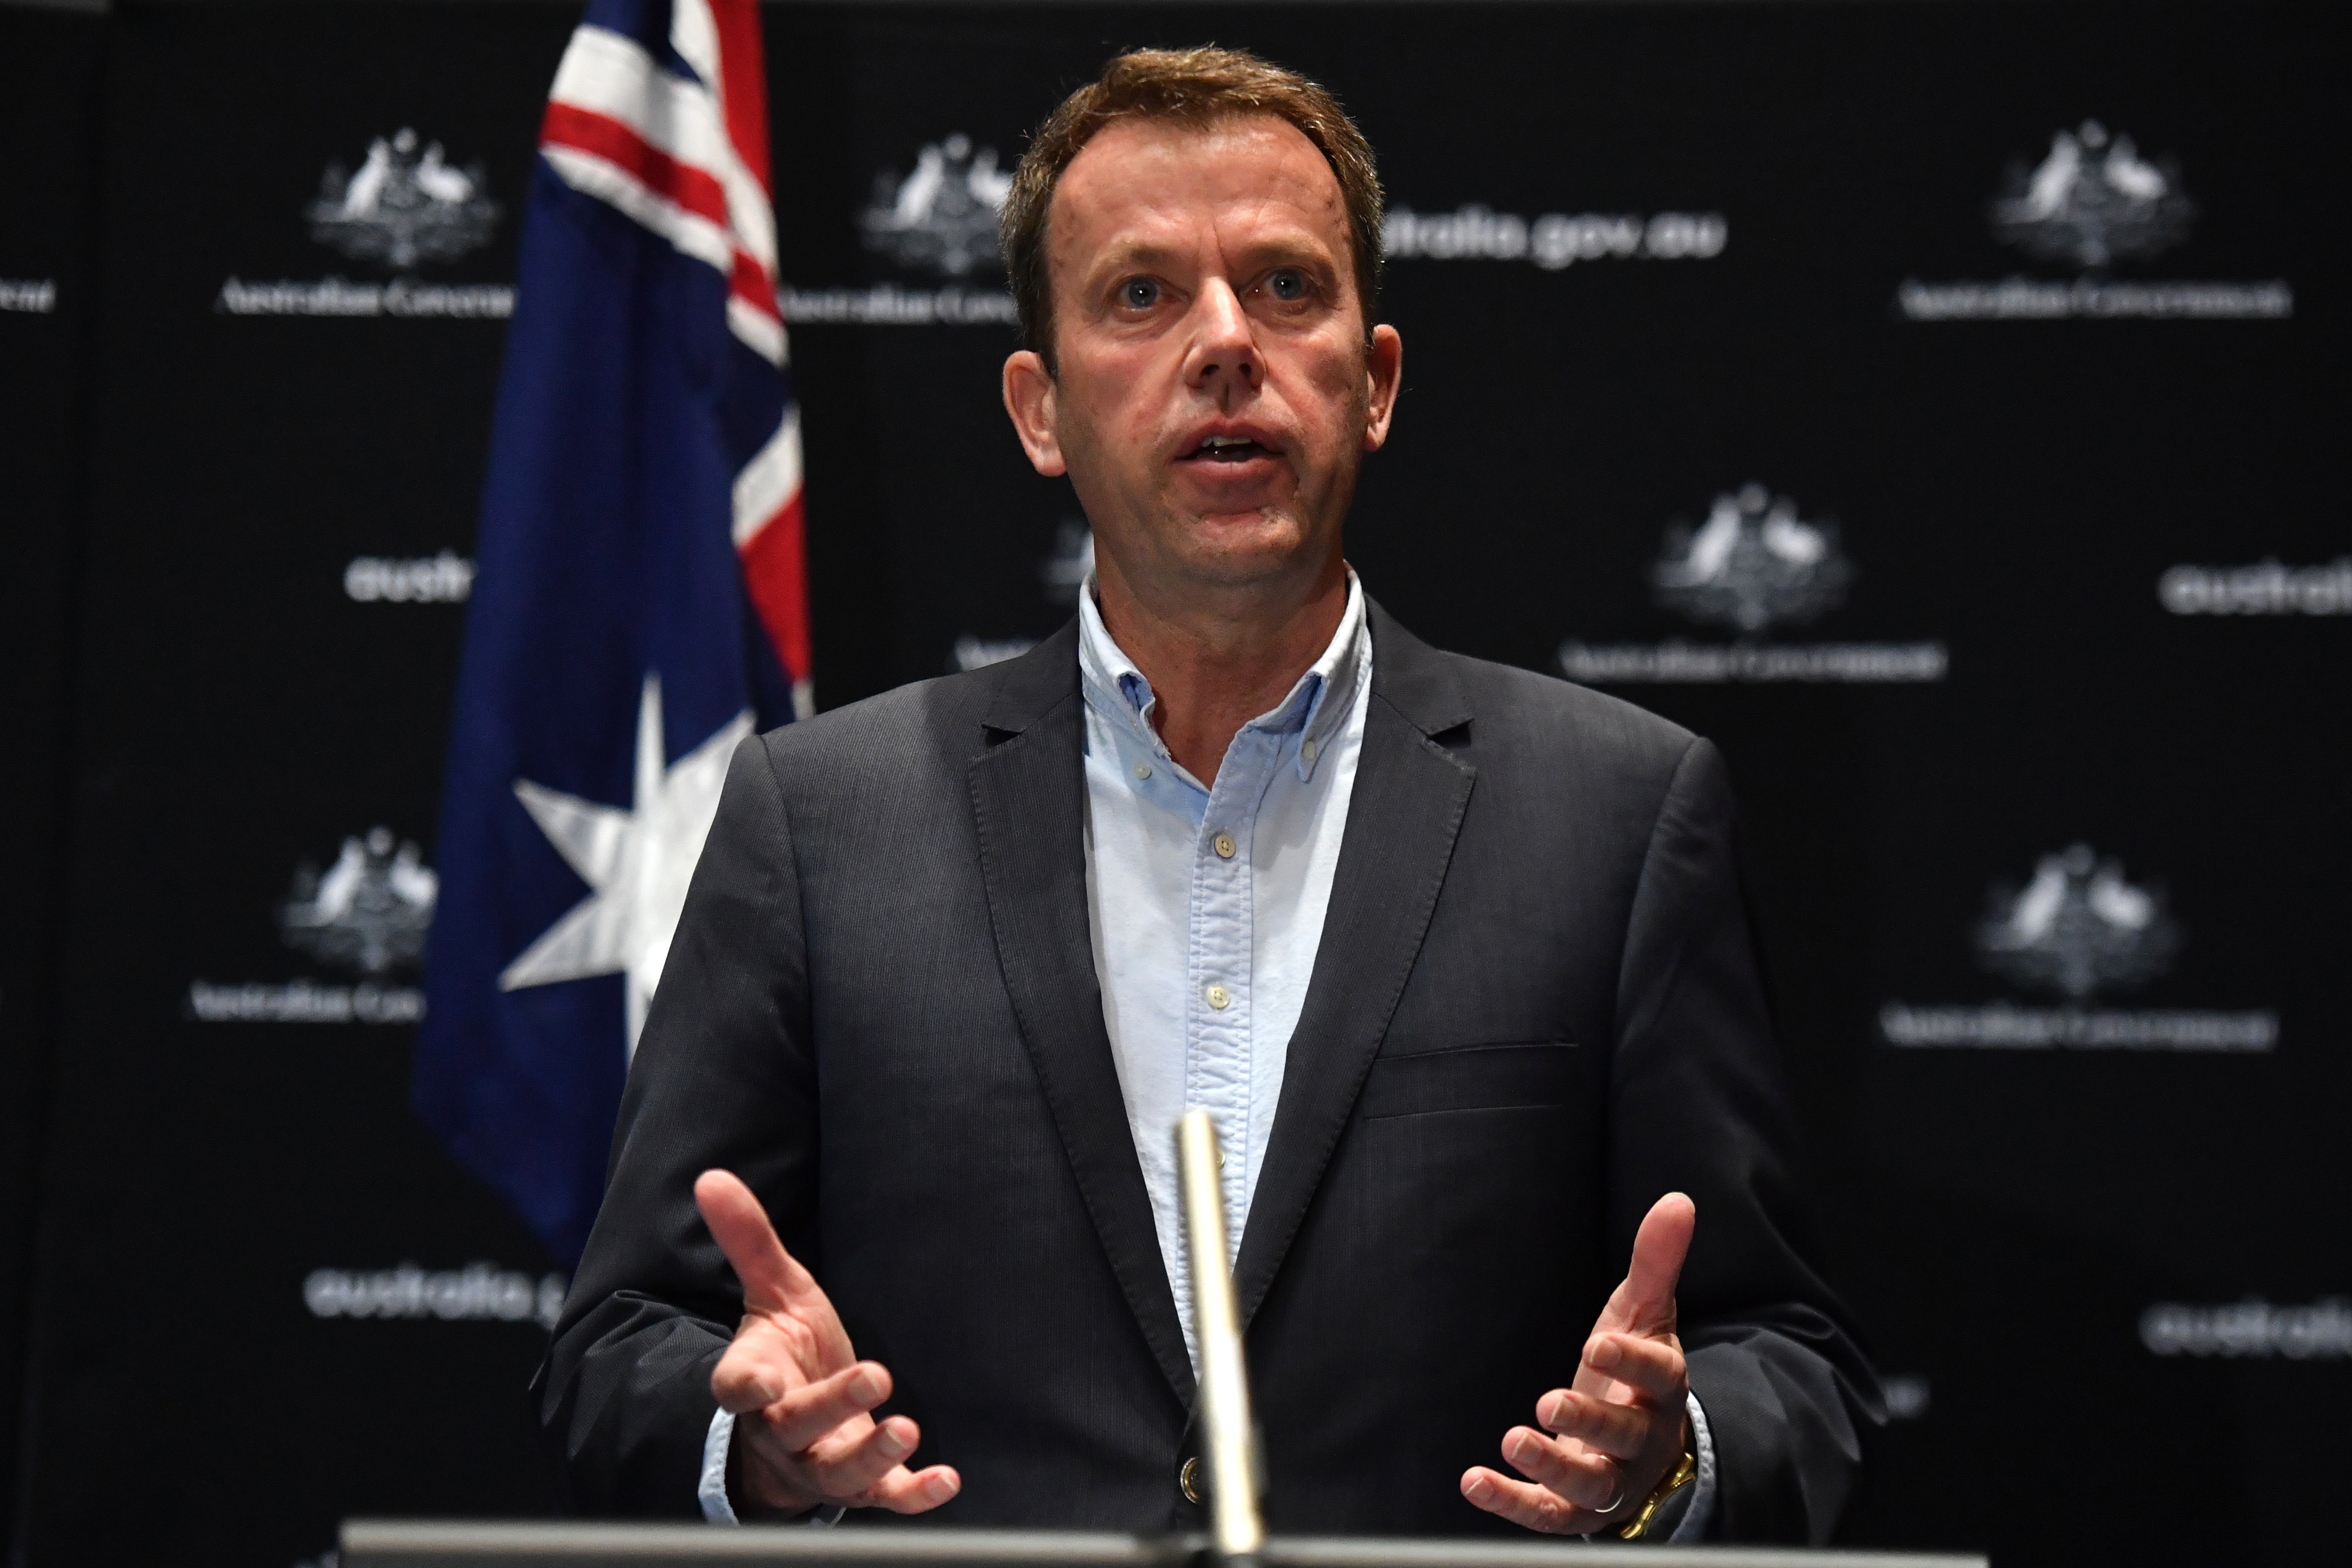 Minister for Education Dan Tehan speaks to the media at a press conference at Parliament House in Canberra, Sunday, April 12, 2020. (AAP Image/Mick Tsikas) NO ARCHIVING